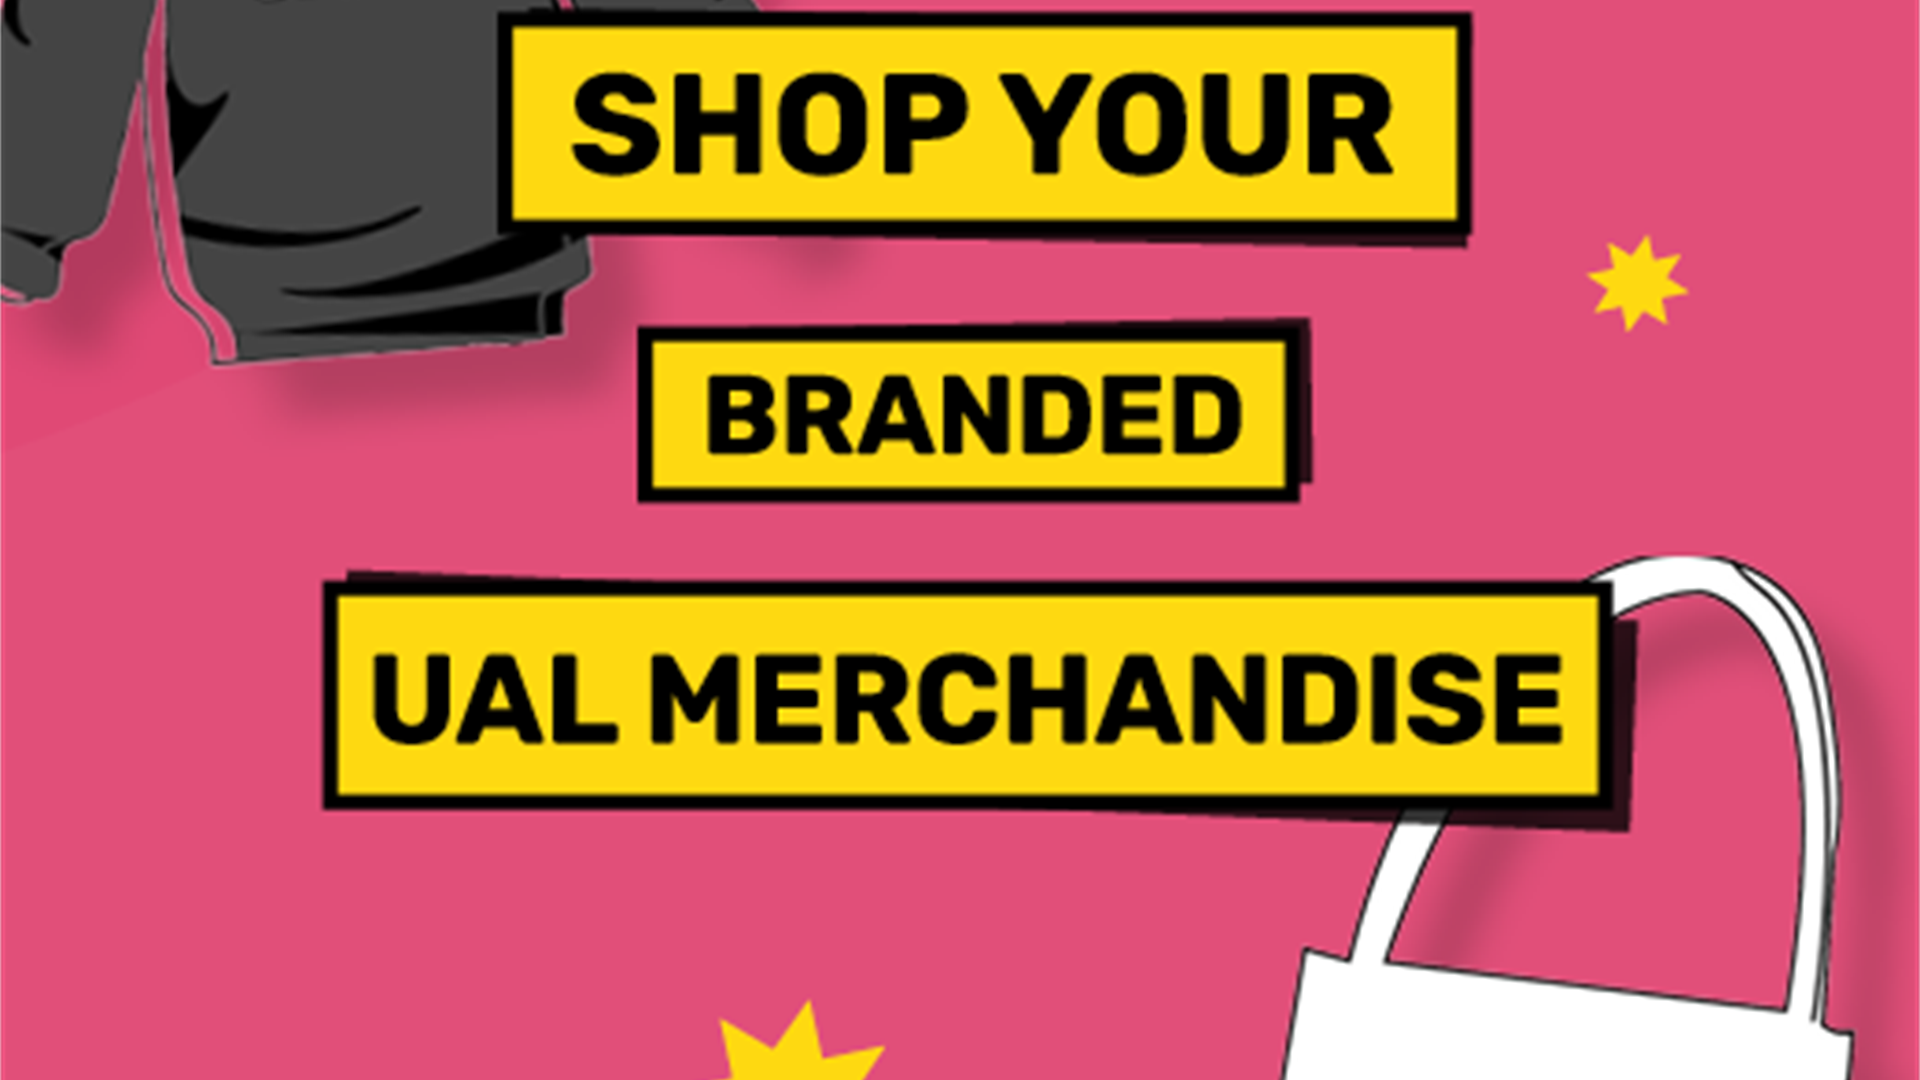 The OFFICIAL shop for all your  UAL merchandise! Any queries, please contact info@su.arts.ac.uk